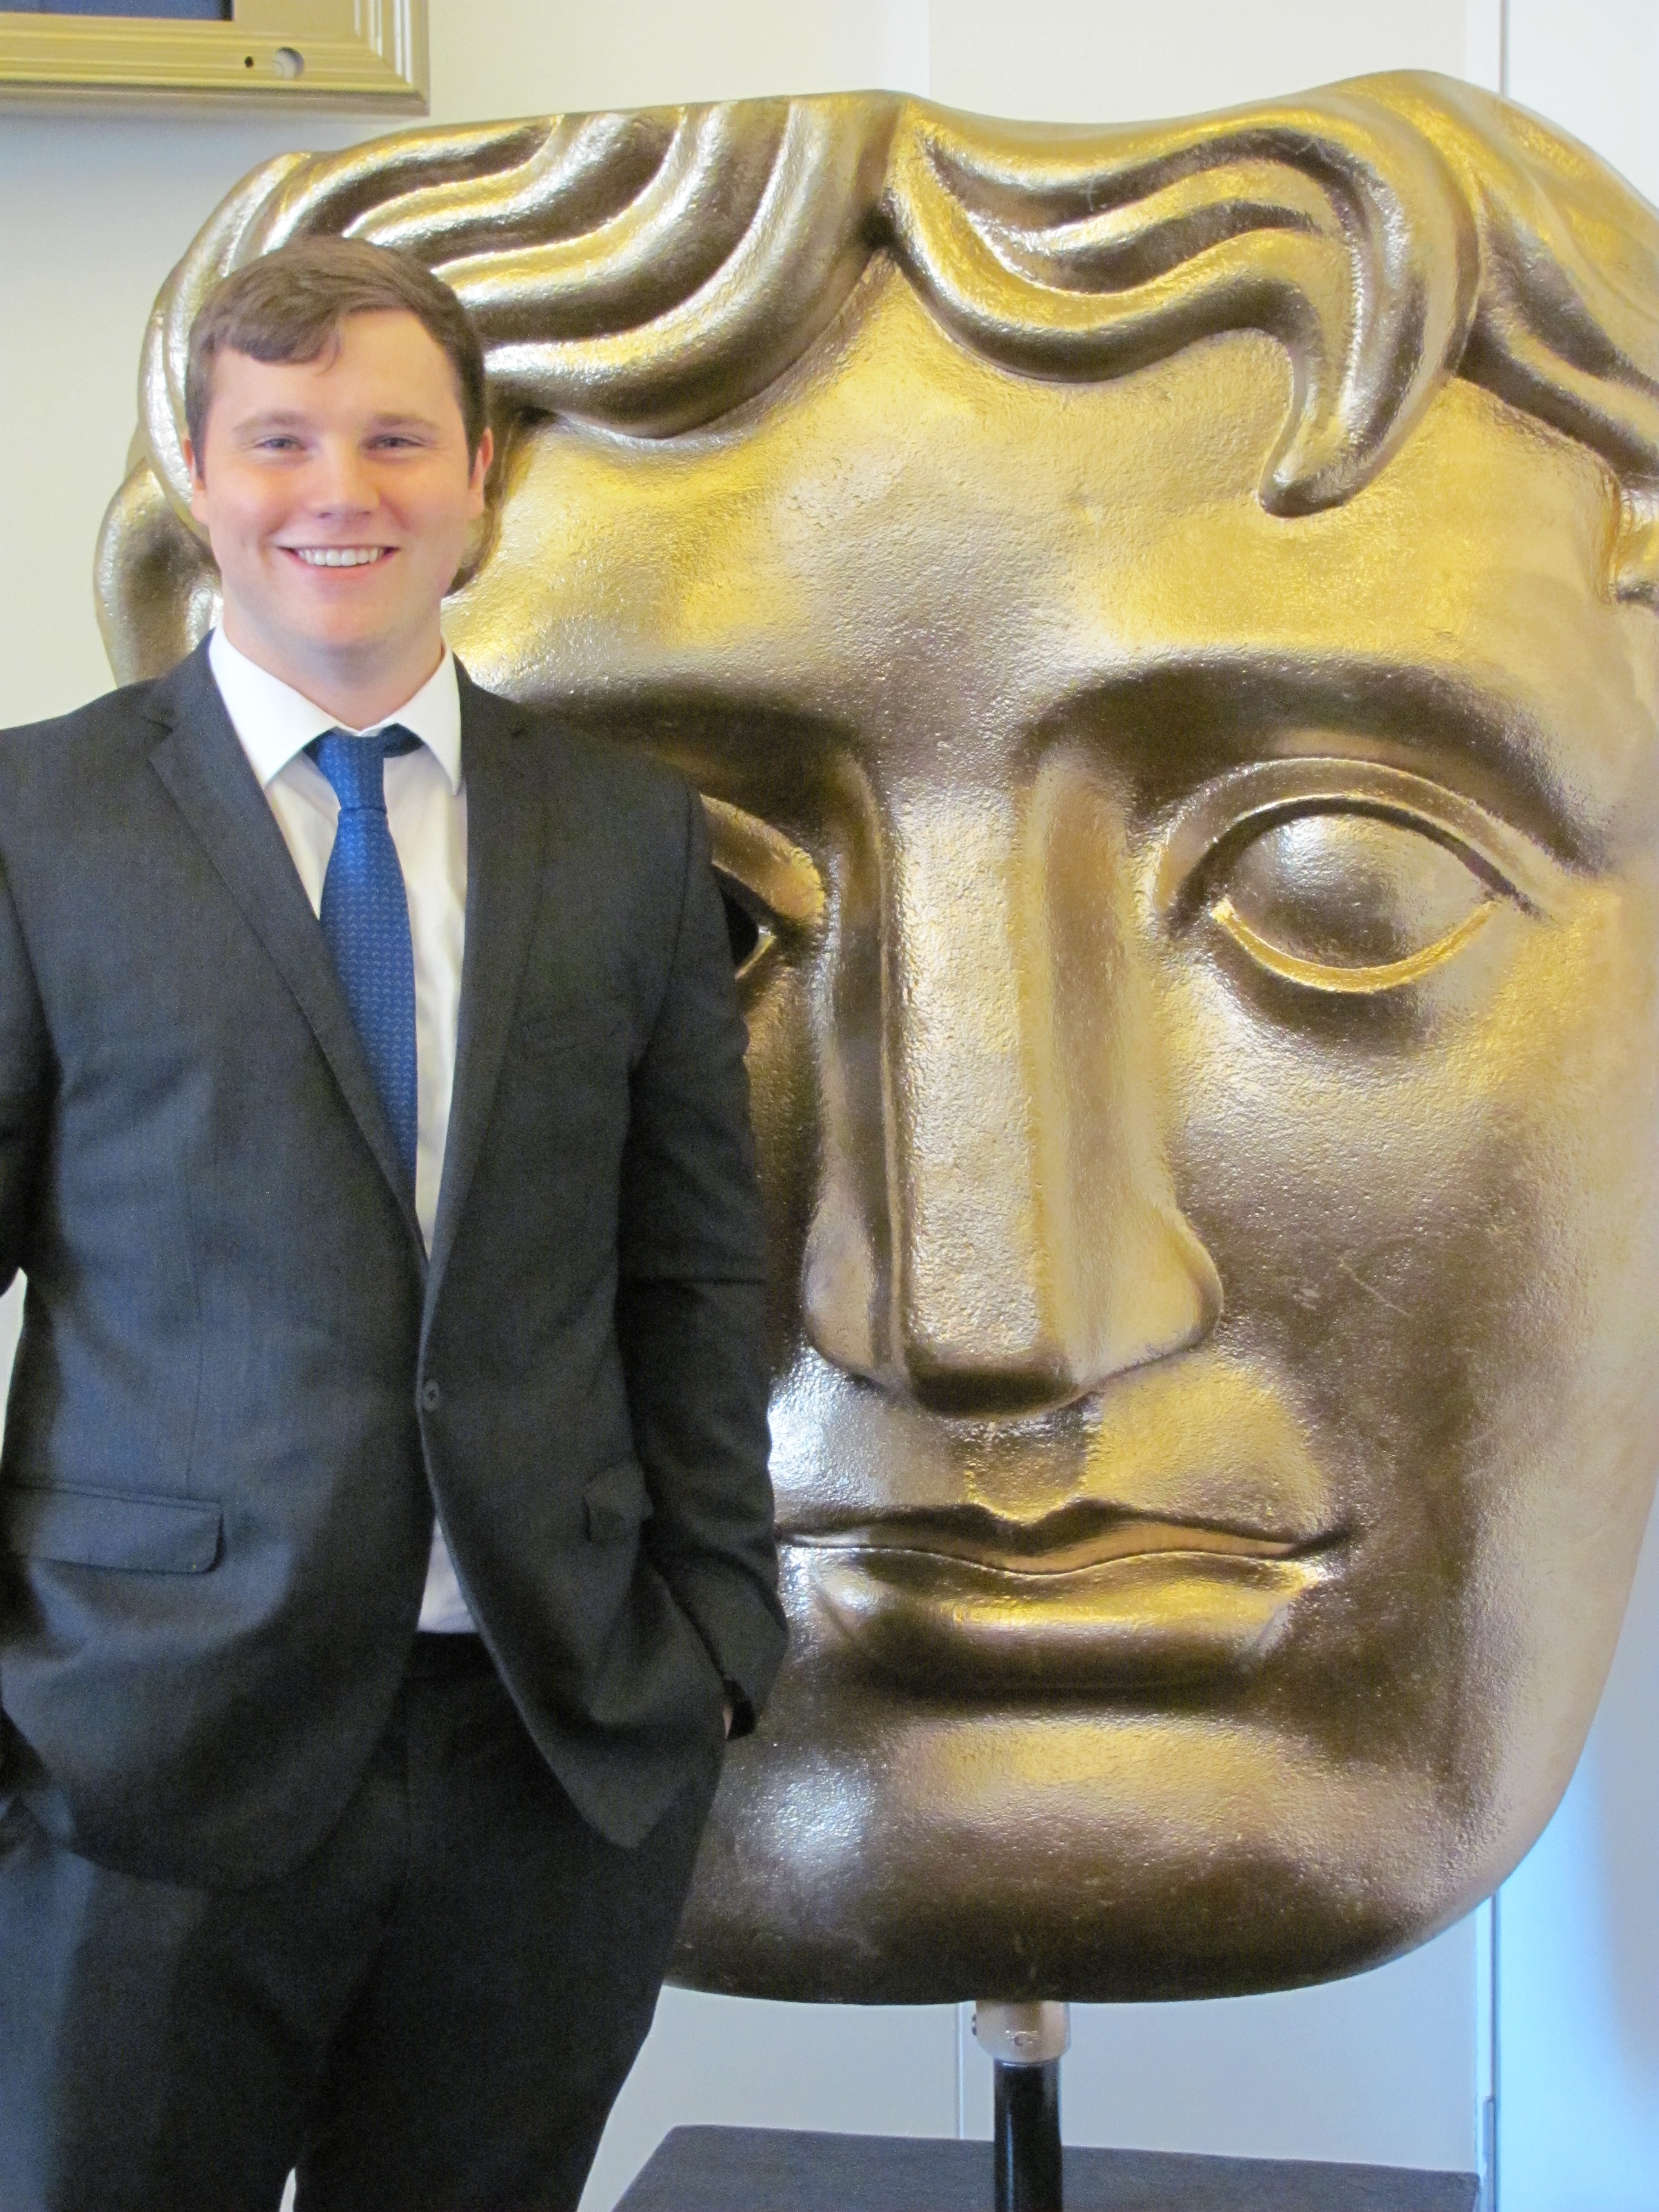 A visit to BAFTA when short film 'Patch' was screened for its Premier.